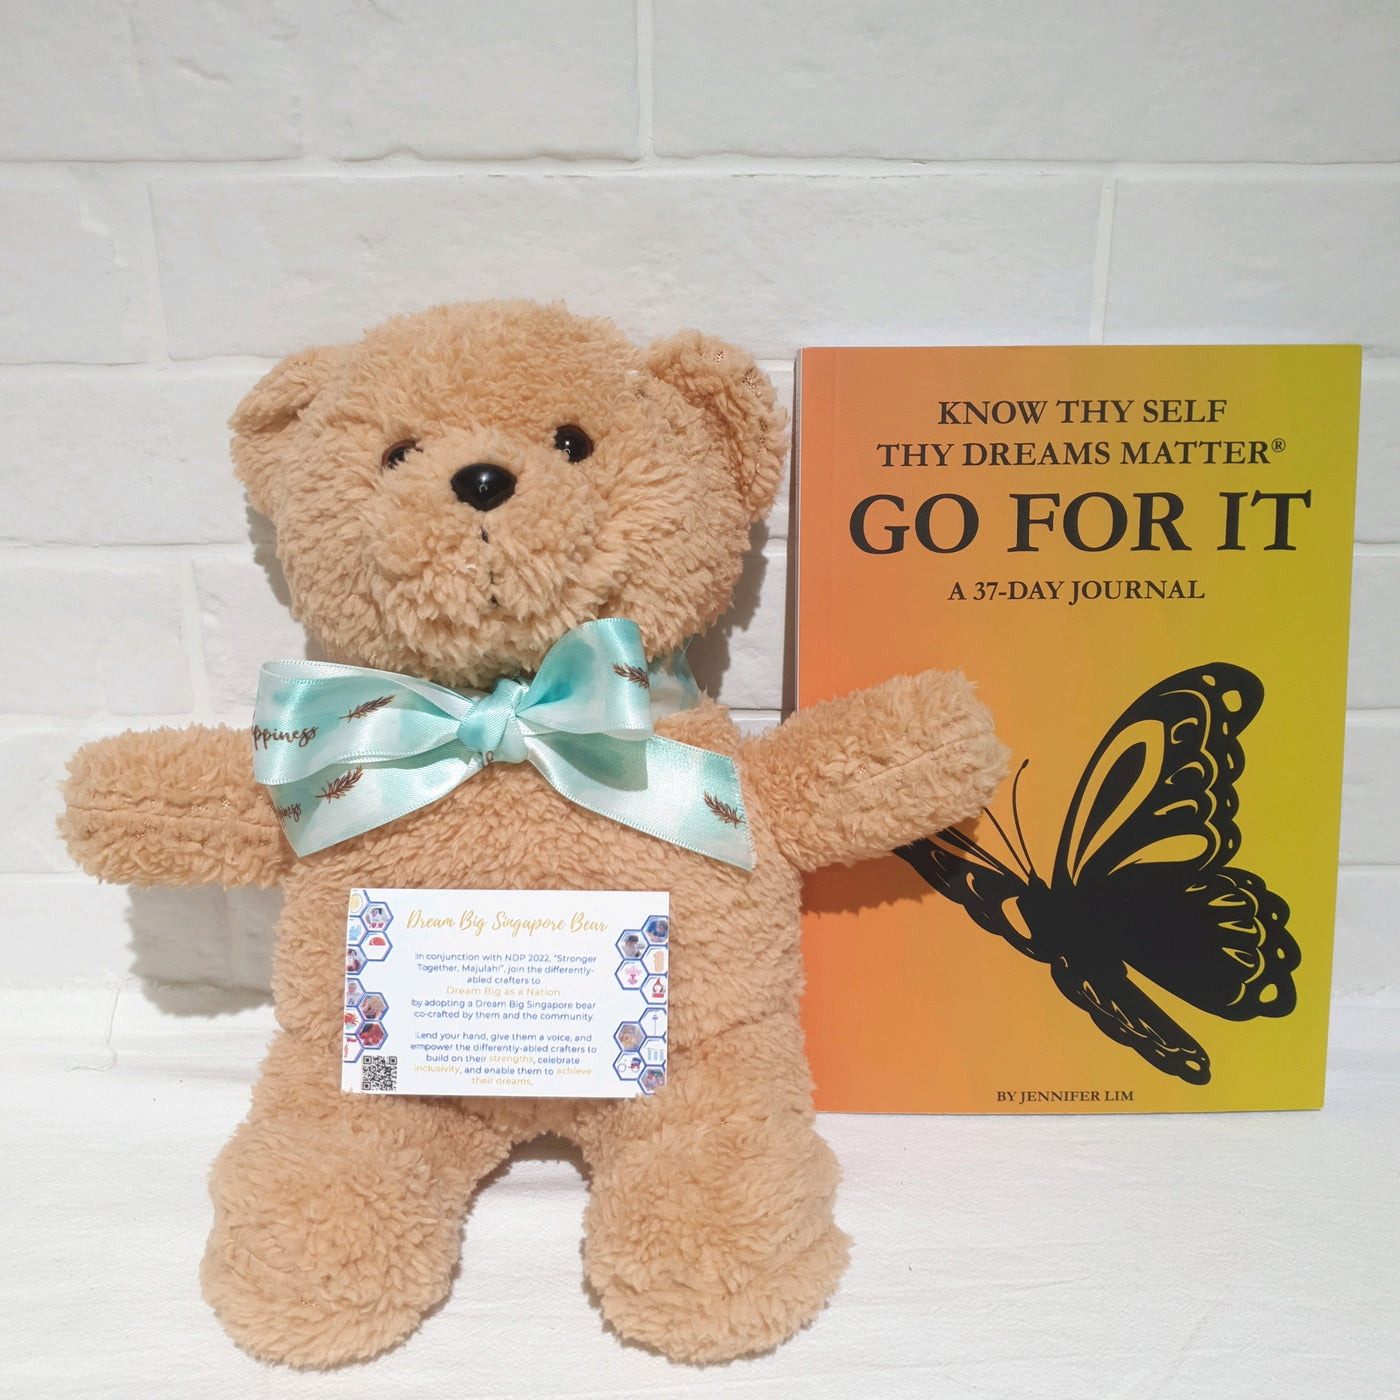 Singapore Dream Big Bear with "GO FOR IT" 37-day motivational journal